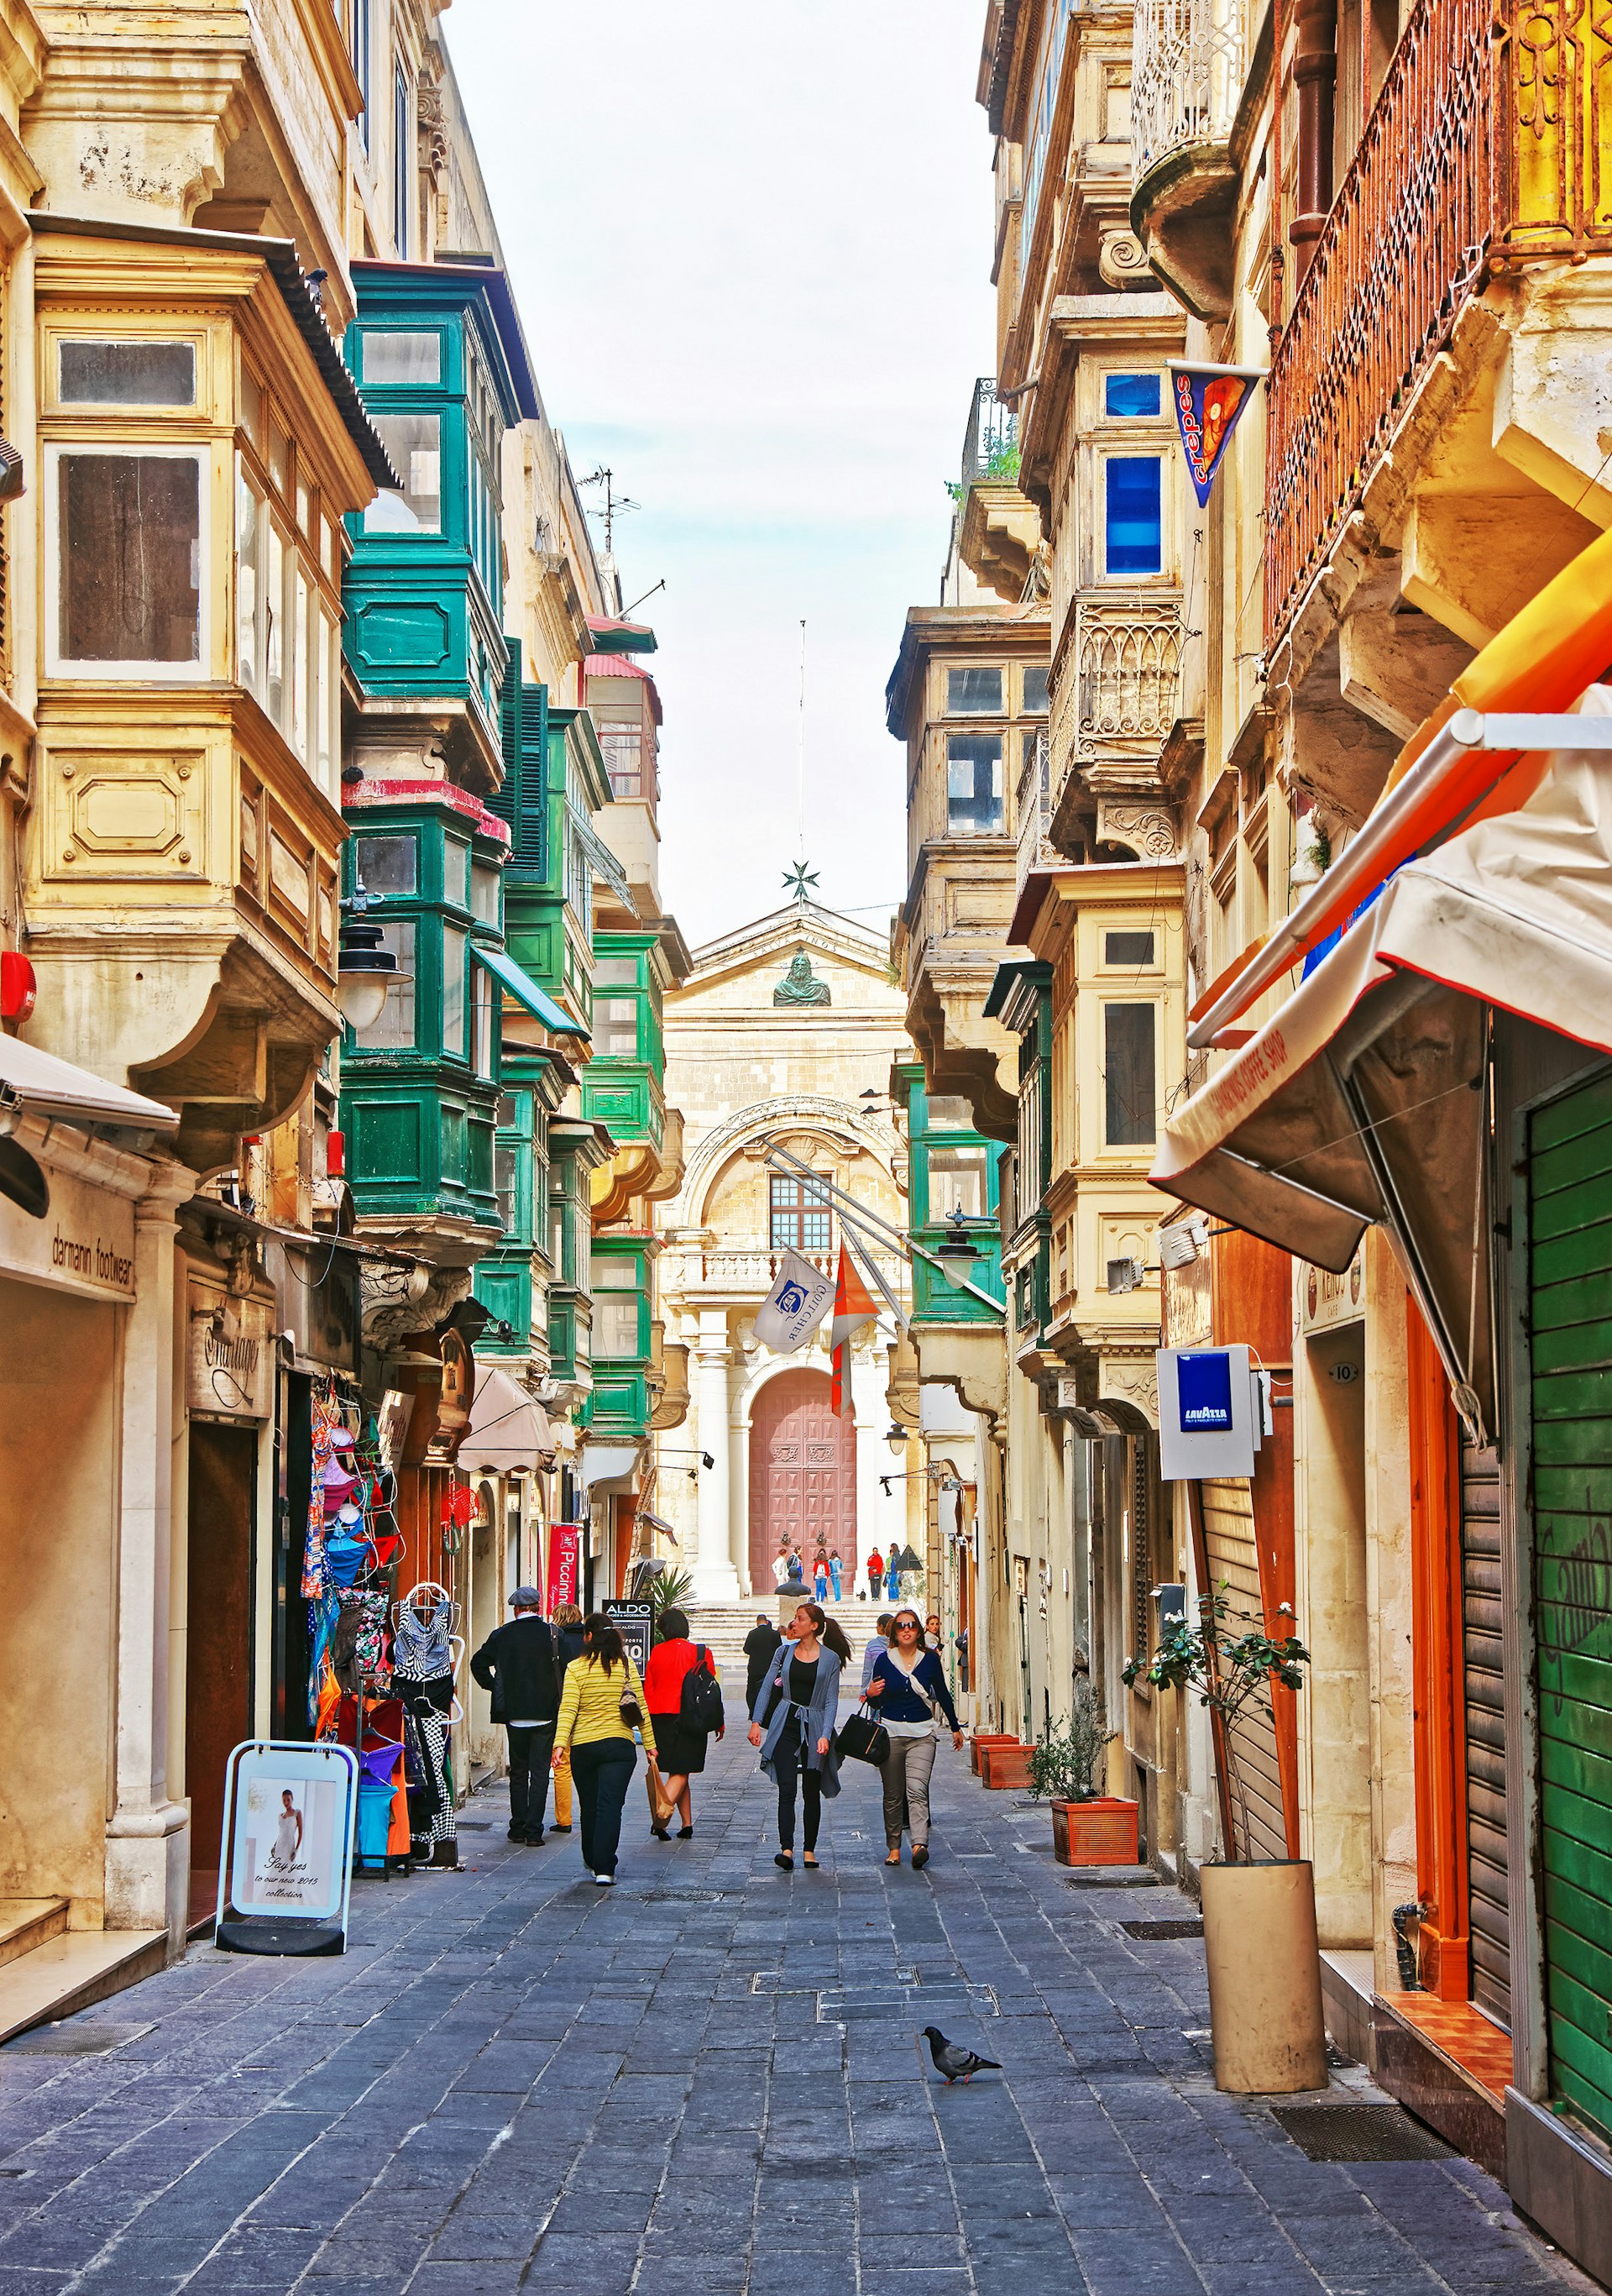 People in the street full of houses with traditional green balconies in Valletta old town